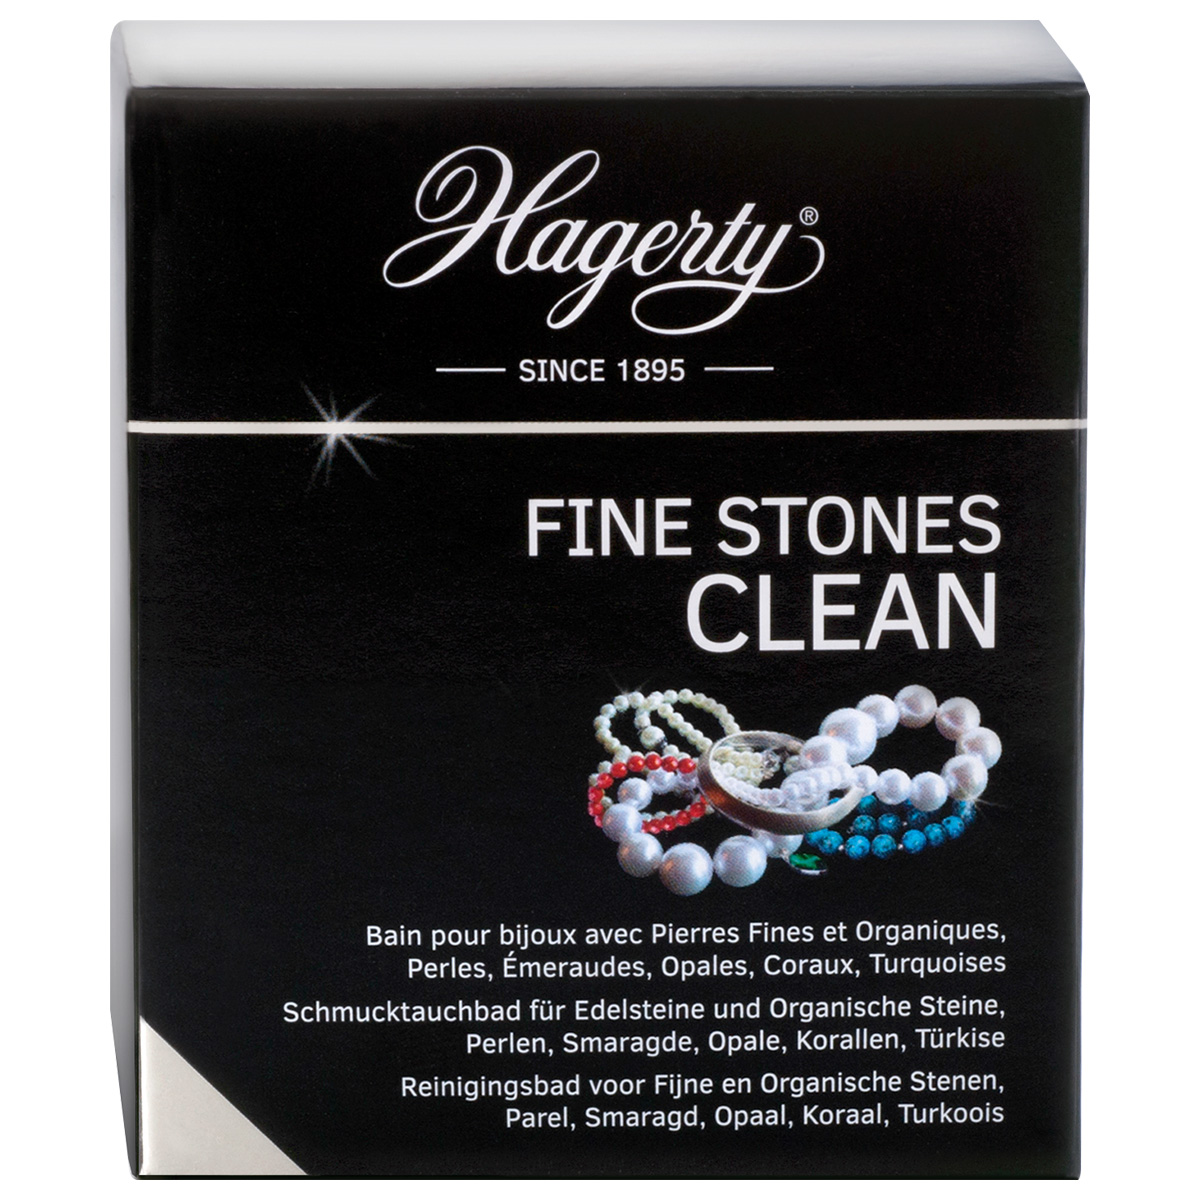 Hagerty Fine Stones Clean, jewelry care product for gemstones, 170 ml